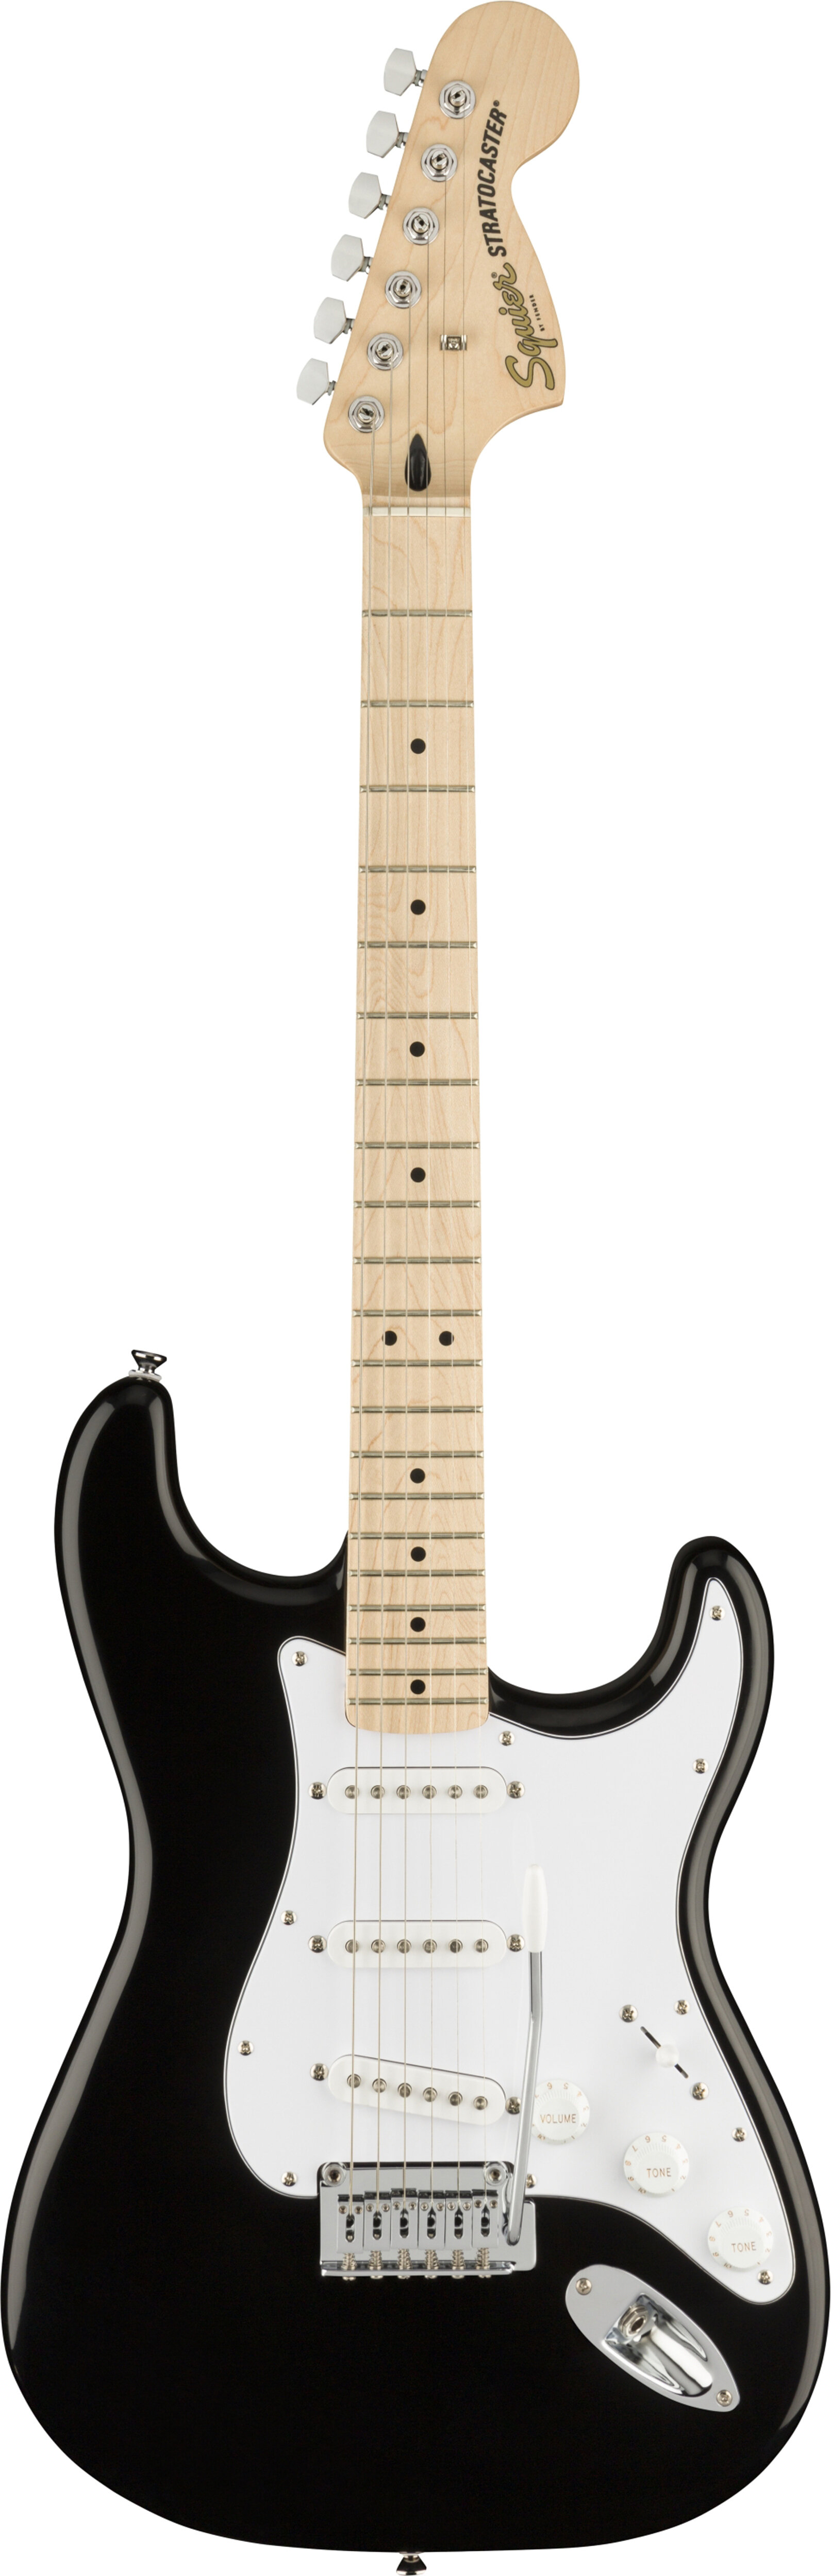 Squier Affinity Stratocaster MN Black -  0378002506